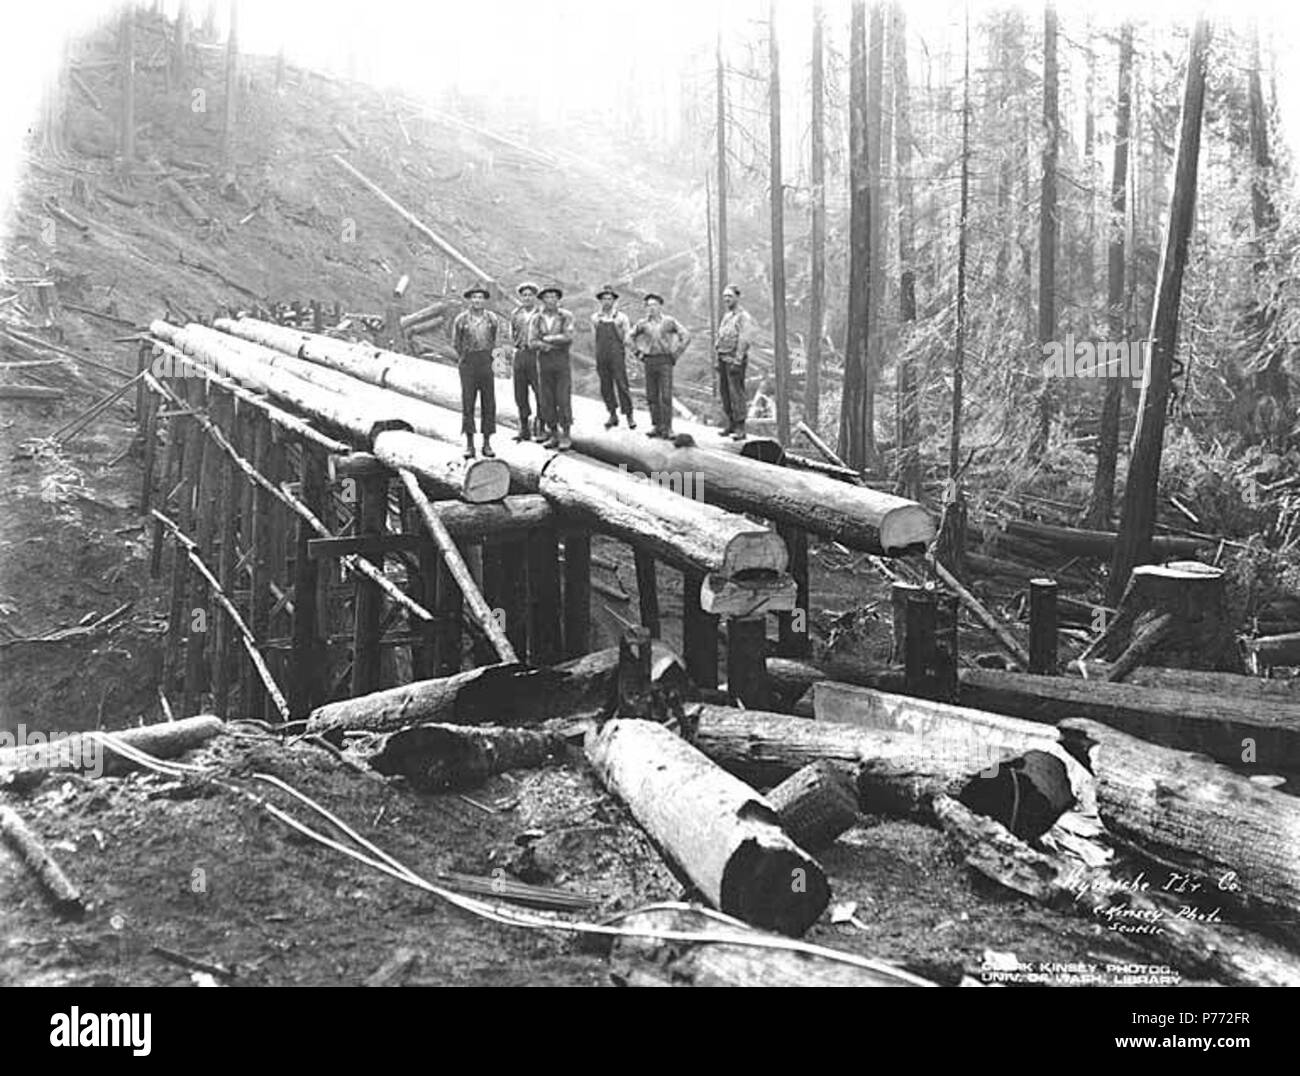 . English: Construction crew with log trestle under construction, Wynooche Timber Company, ca. 1921 . English: Caption on image: Wynooche Tbr Co. C. Kinsey Photo, Seattle PH Coll 516.5219 The Wynooche Timber Company began operations ca. 1913 with headquarters in Hoquiam and logging operations in Montesano. It was named for Wynooche Valley in northeast Grays Harbor County. Wynooche Timber Company was bought out by Schafer Brothers Logging Company ca. 1927. Subjects (LCTGM): Trestles--Washington (State); Railroad construction workers; Railroad construction & maintenance--Washington (State); Lumb Stock Photo